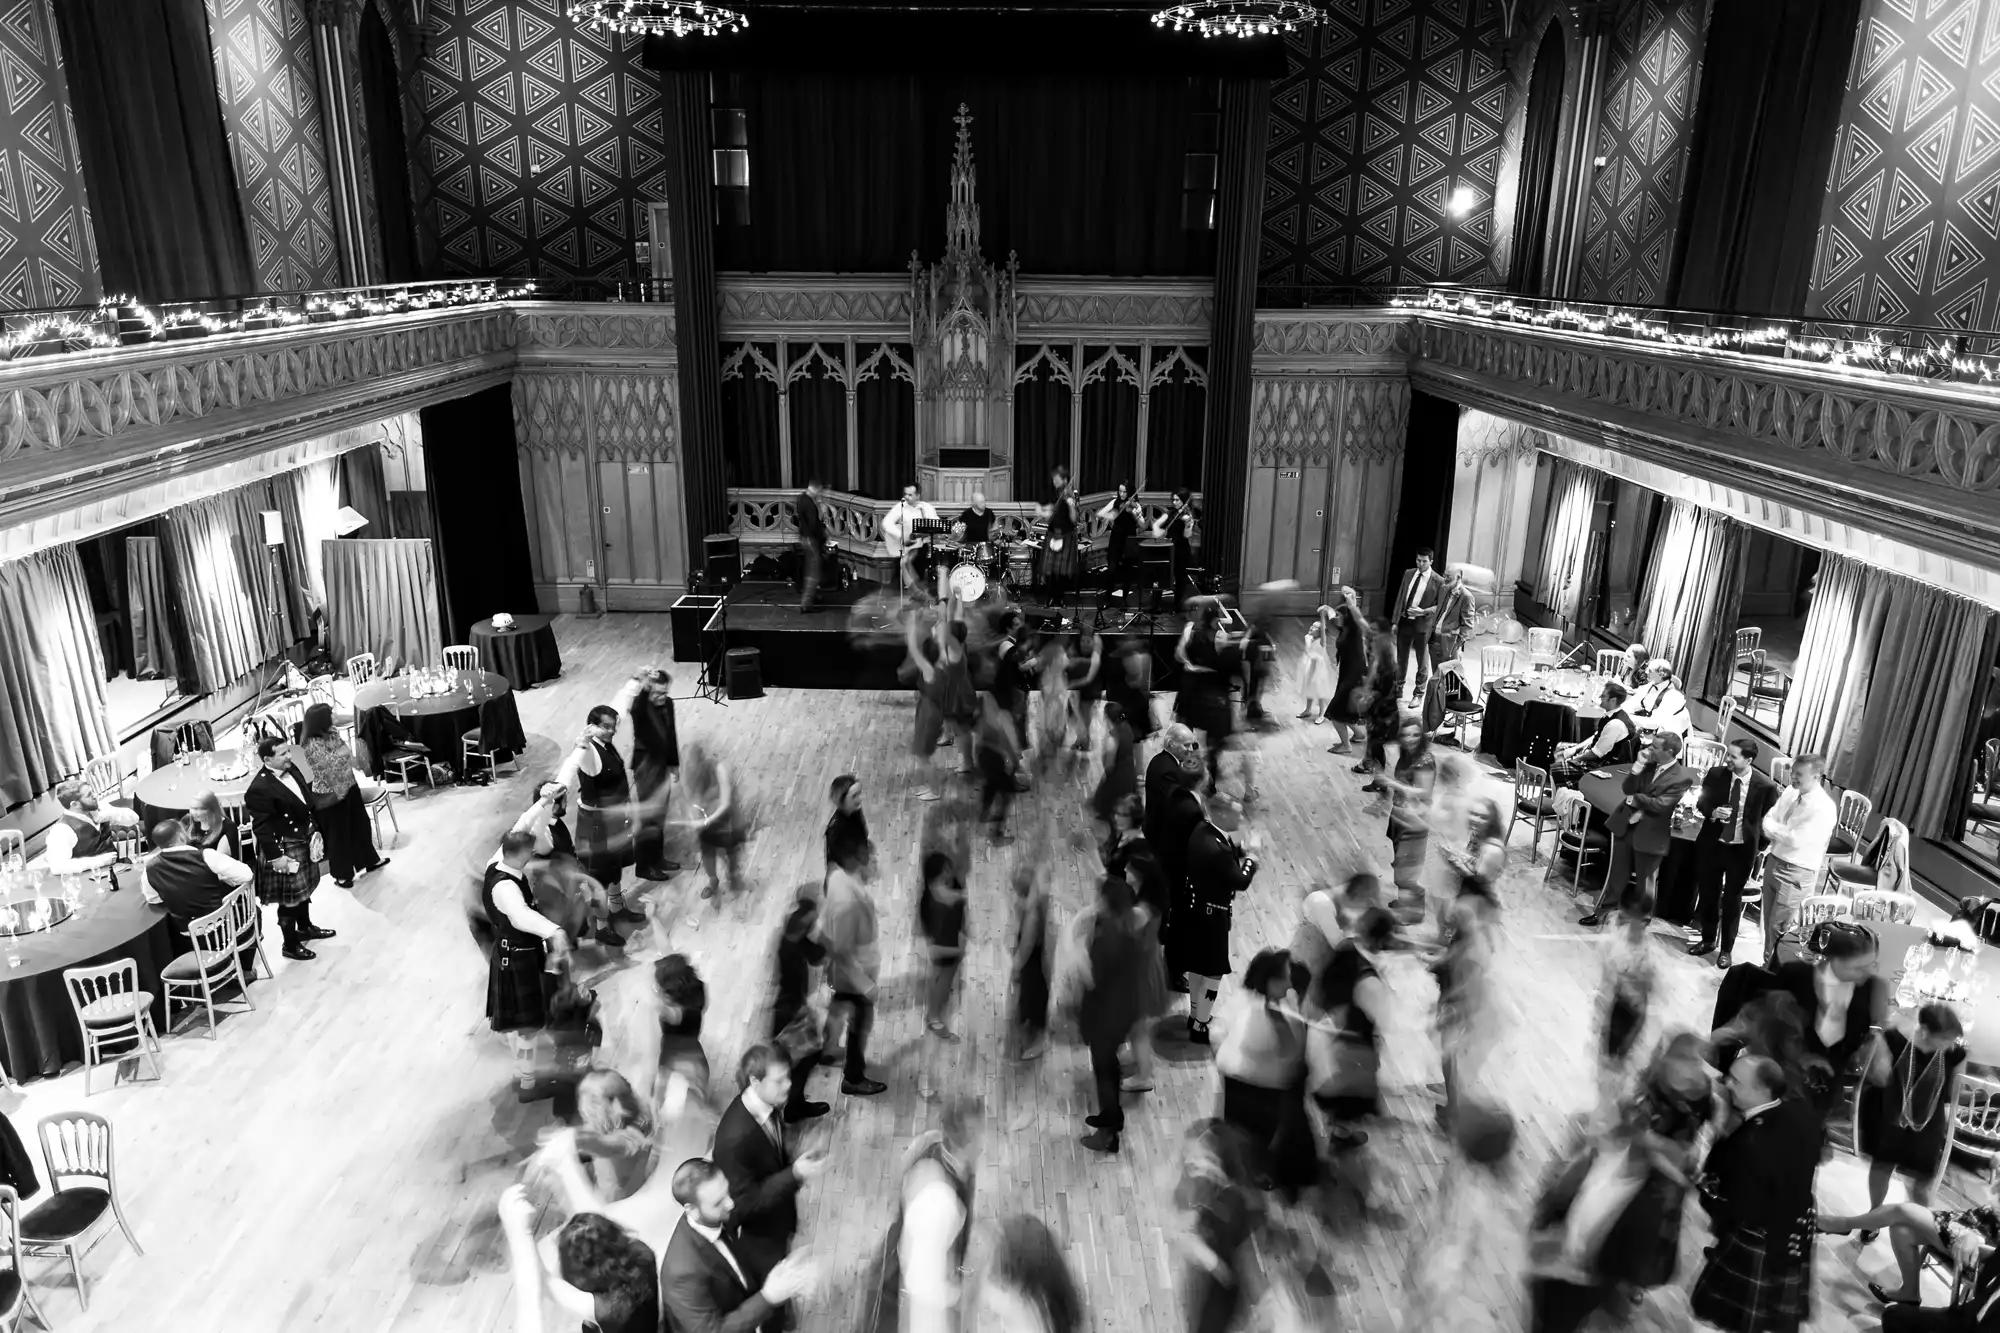 Black and white photo of a ballroom with many people dancing on the floor and musicians on stage. The audience is seated around the room. The image captures motion blur from dancers.